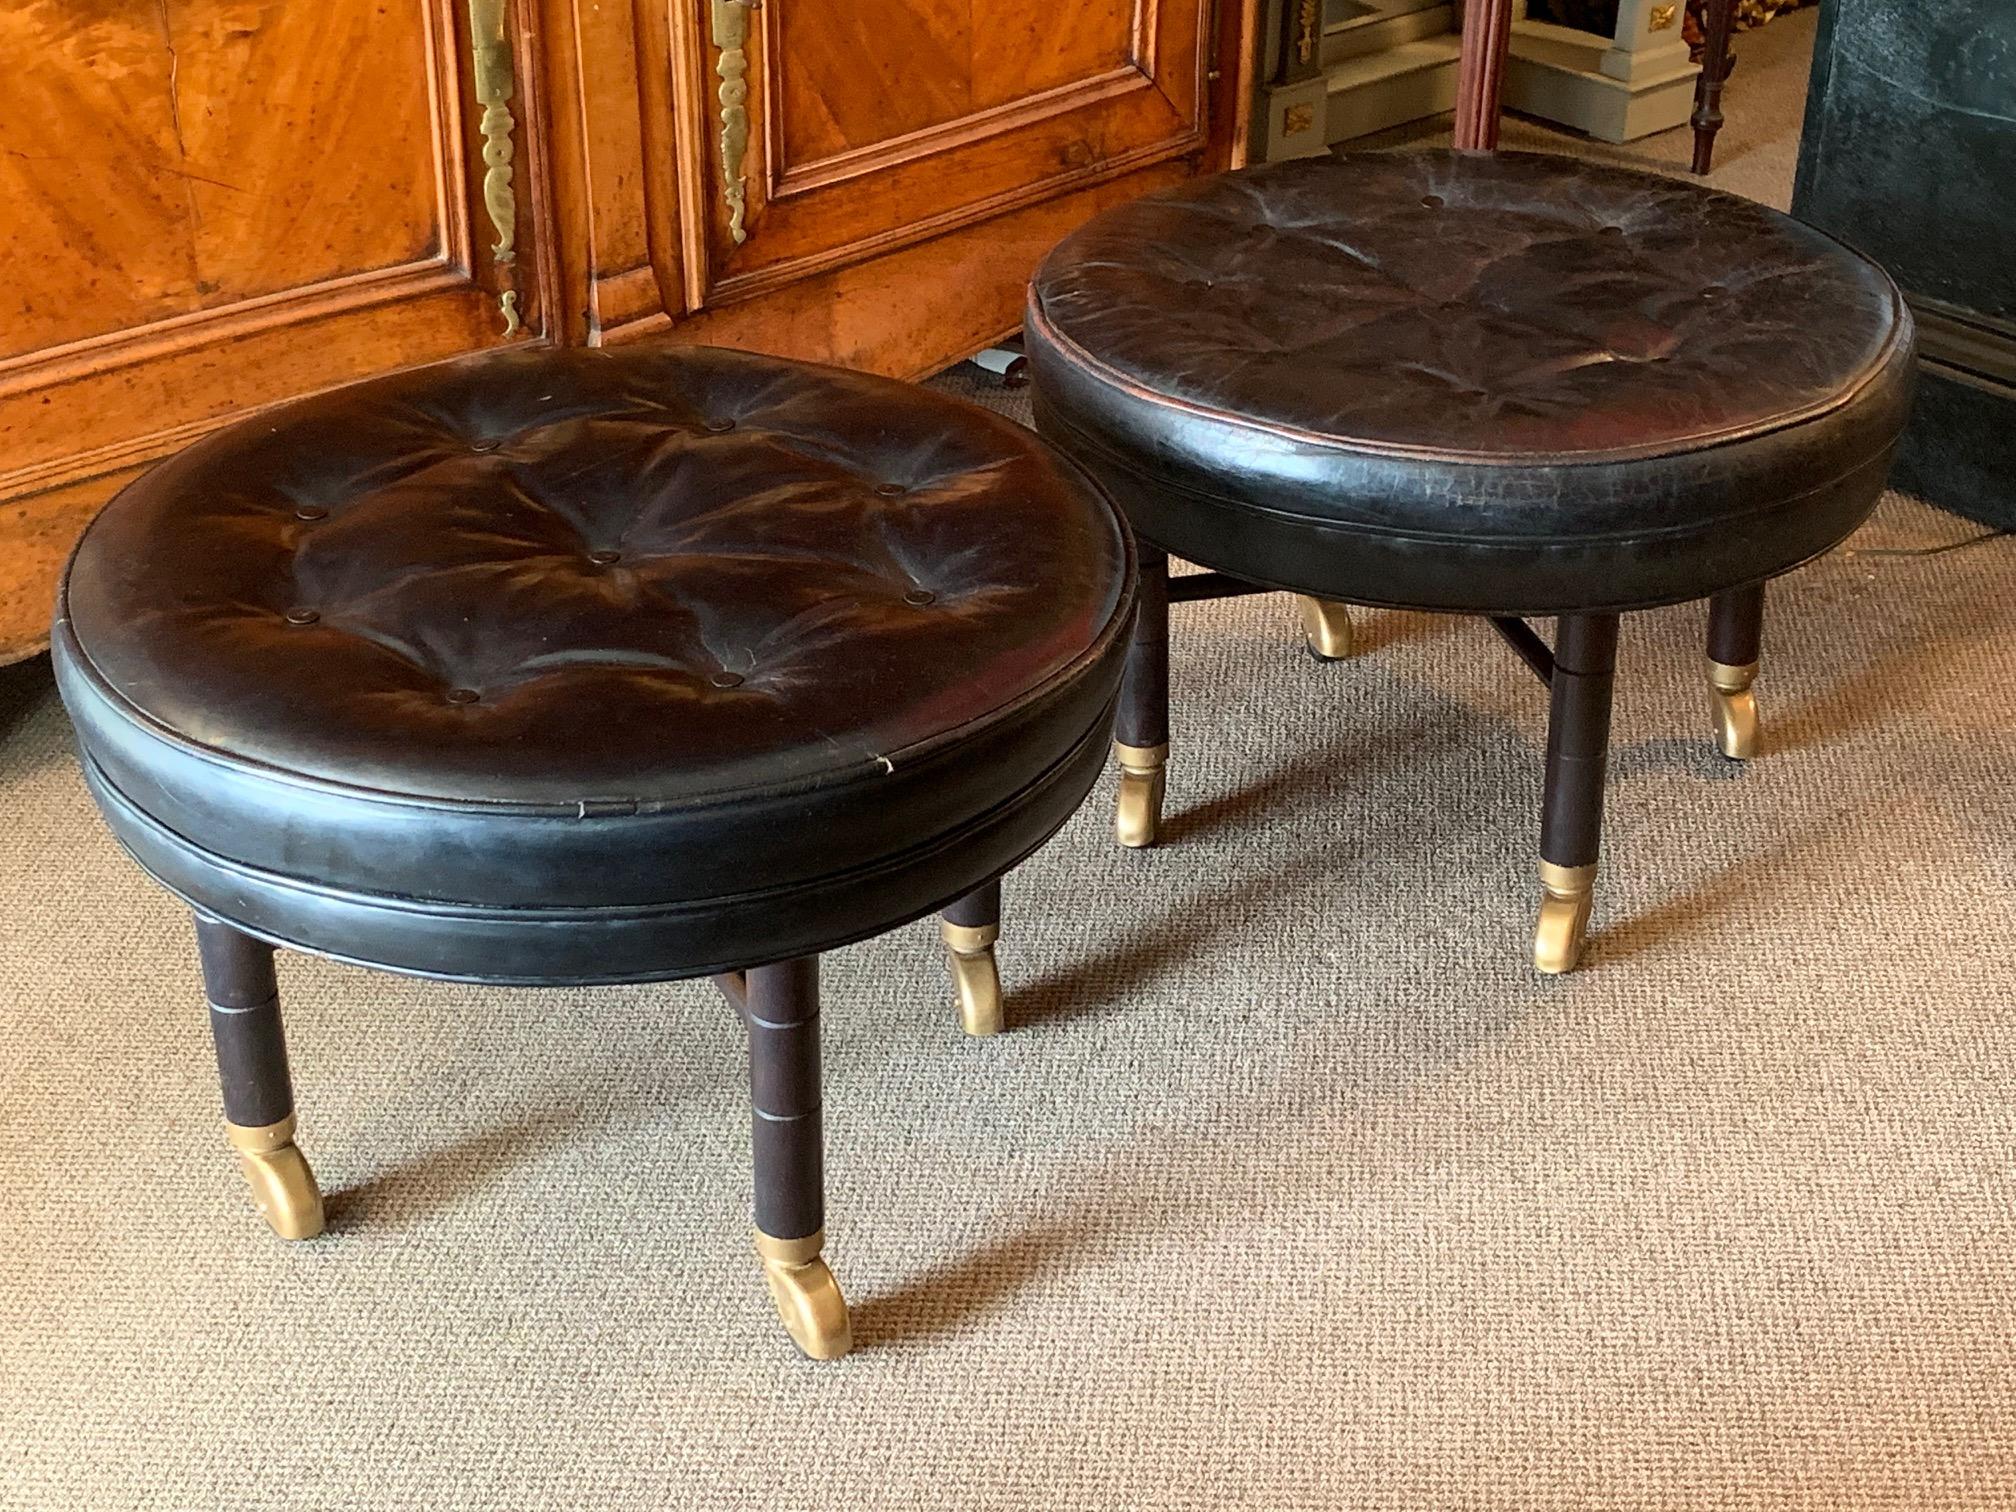 Modern A Pair of Large Round Leather Ottomans by Baker